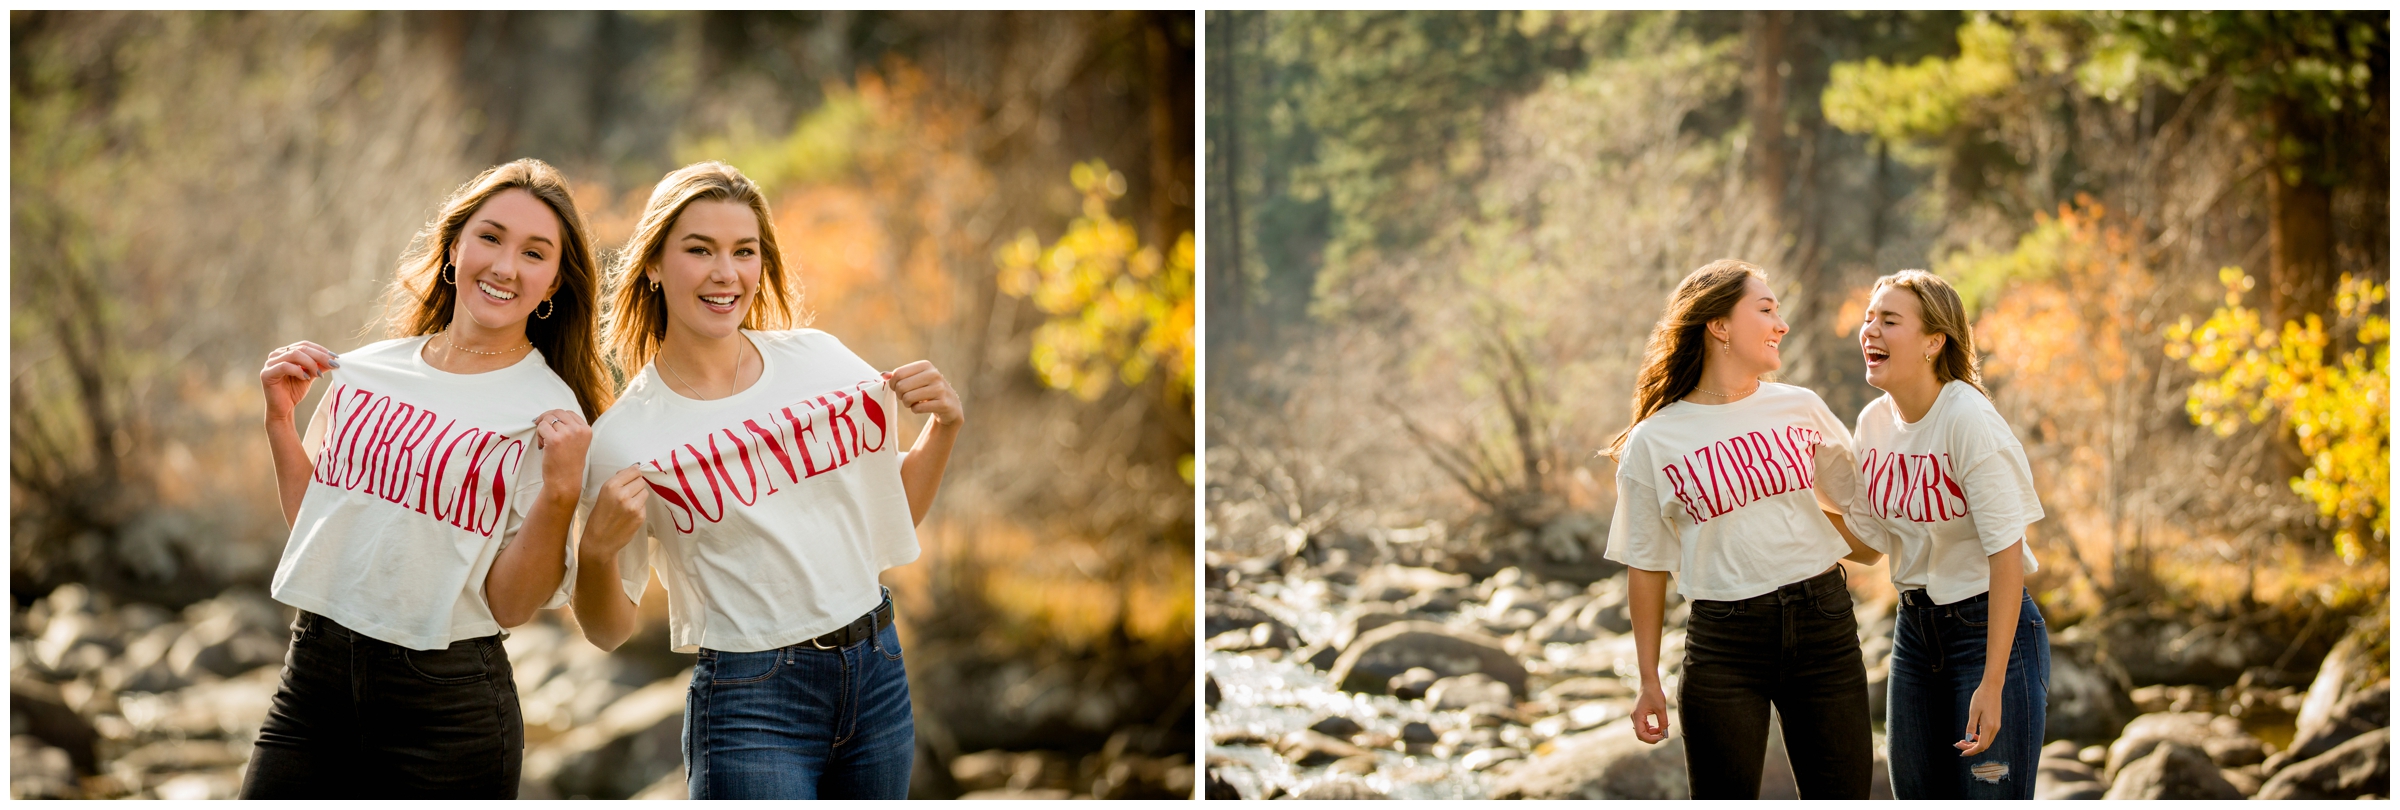 best friends senior photography inspiration in Colorado 